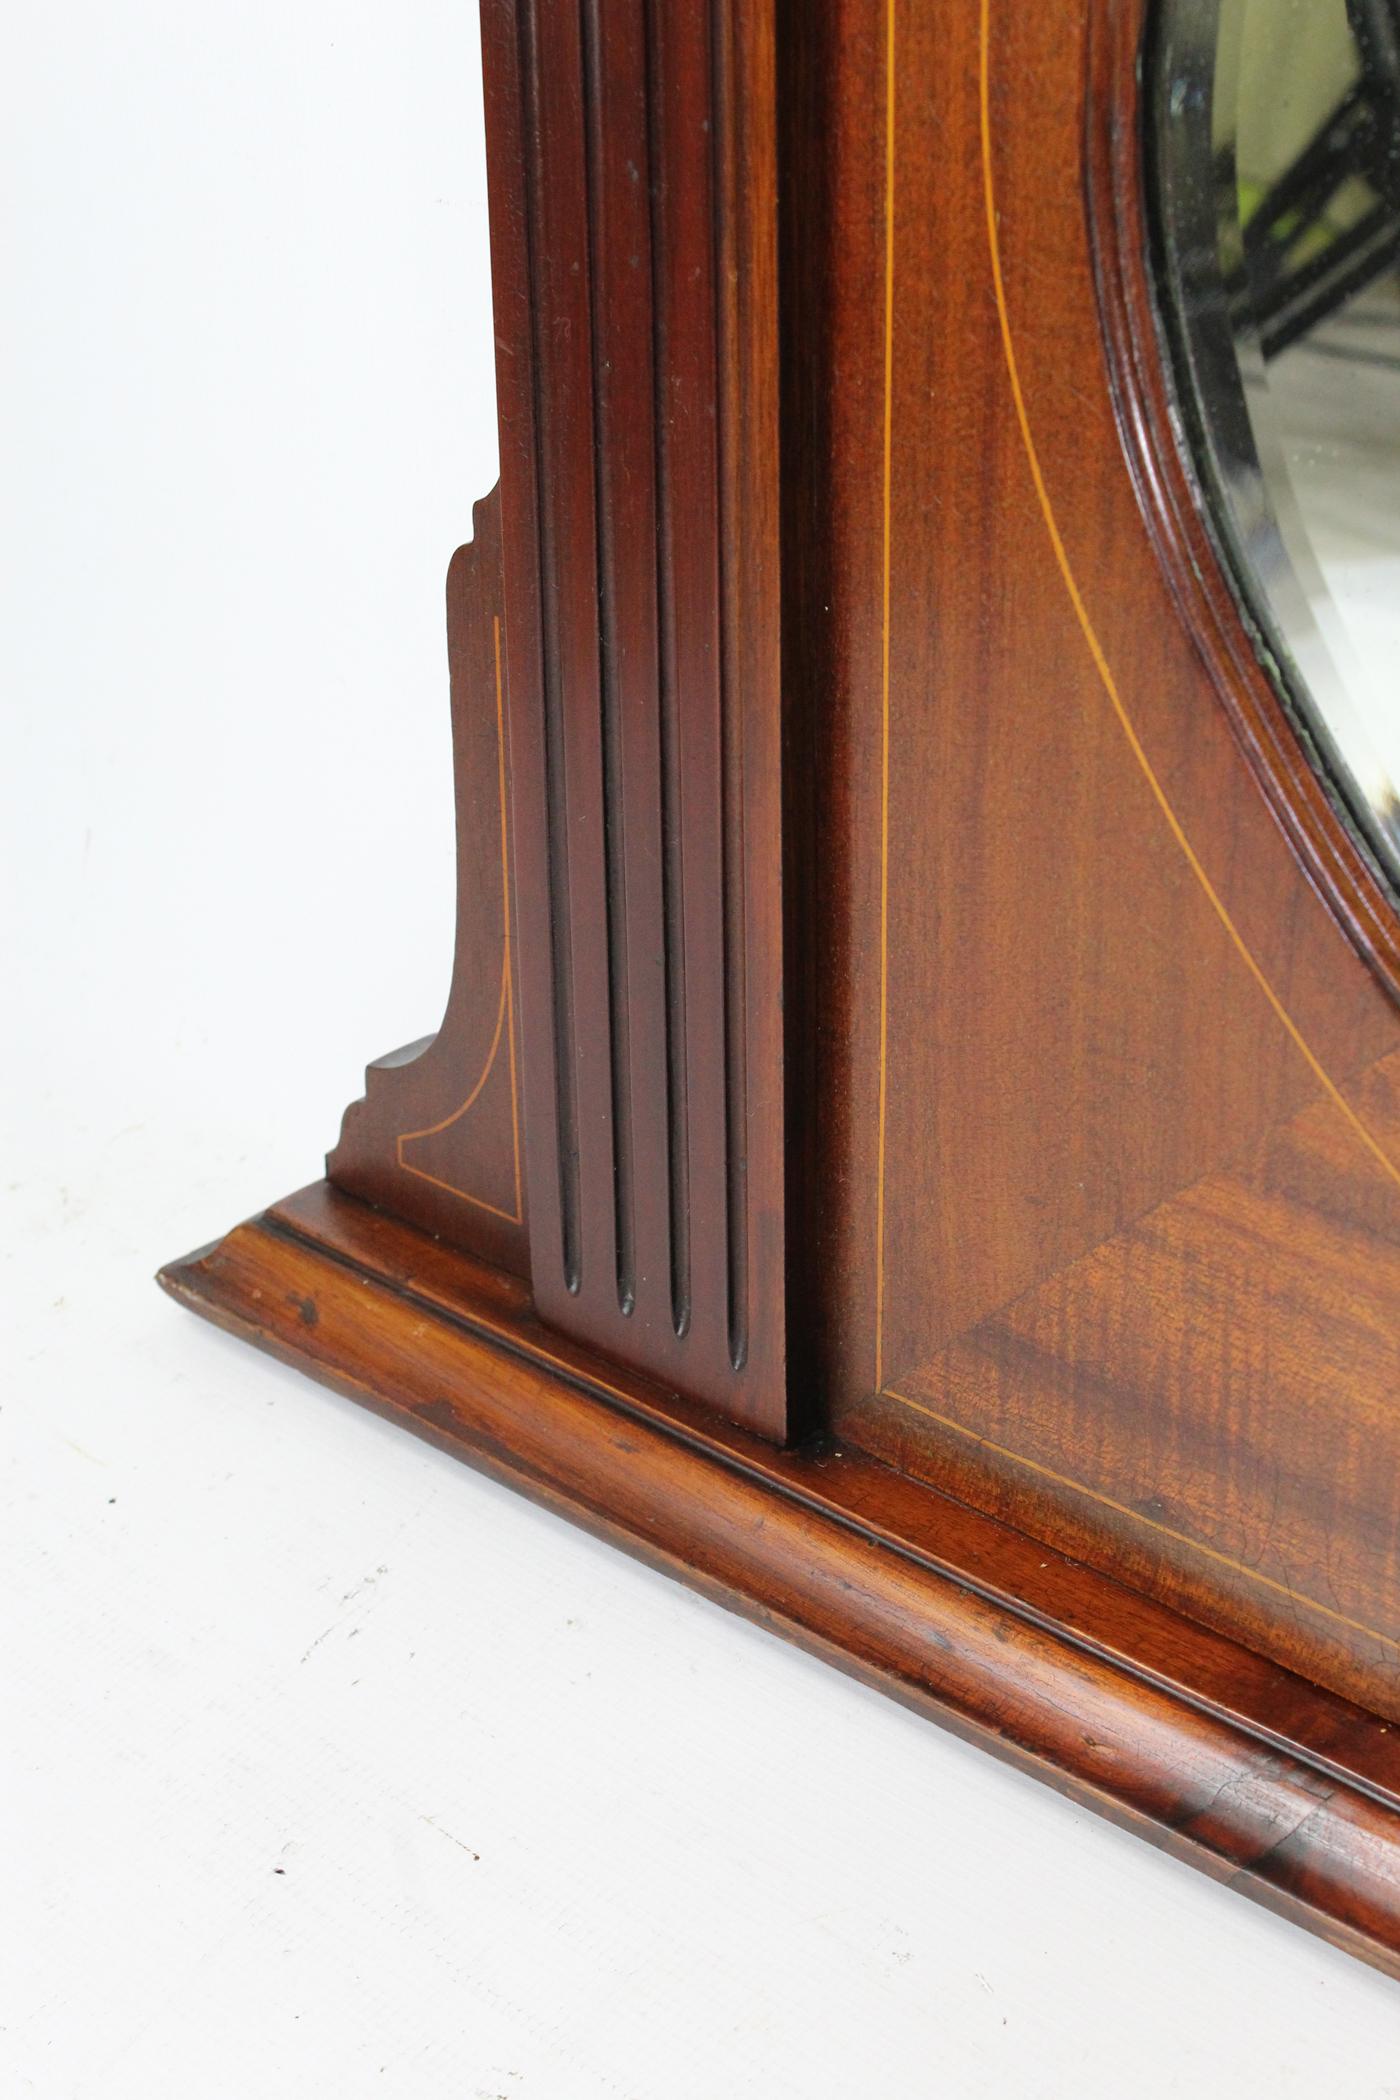 Antique English Edwardian Mahogany Overmantle Mirror, circa 1905 Overmantel  For Sale 3